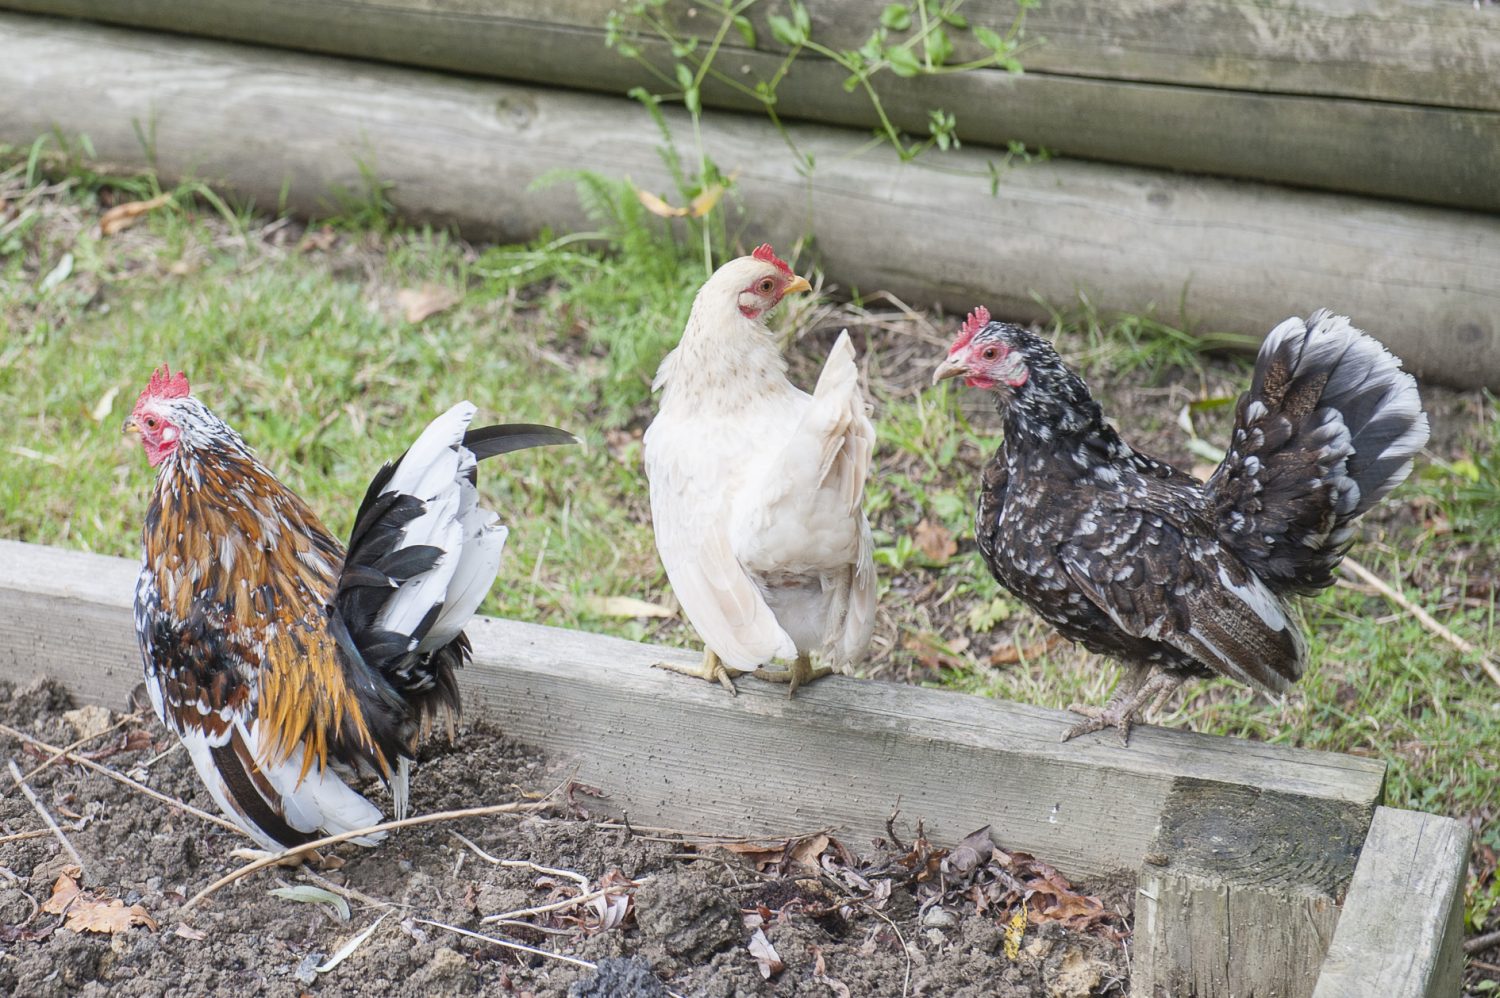 A trio of Serama chickens, one of the smallest breeds of chicken in the world, explore a recently emptied vegetable bed; cosmos fronds provide a rich sea of greenery dotted with pink and white petals